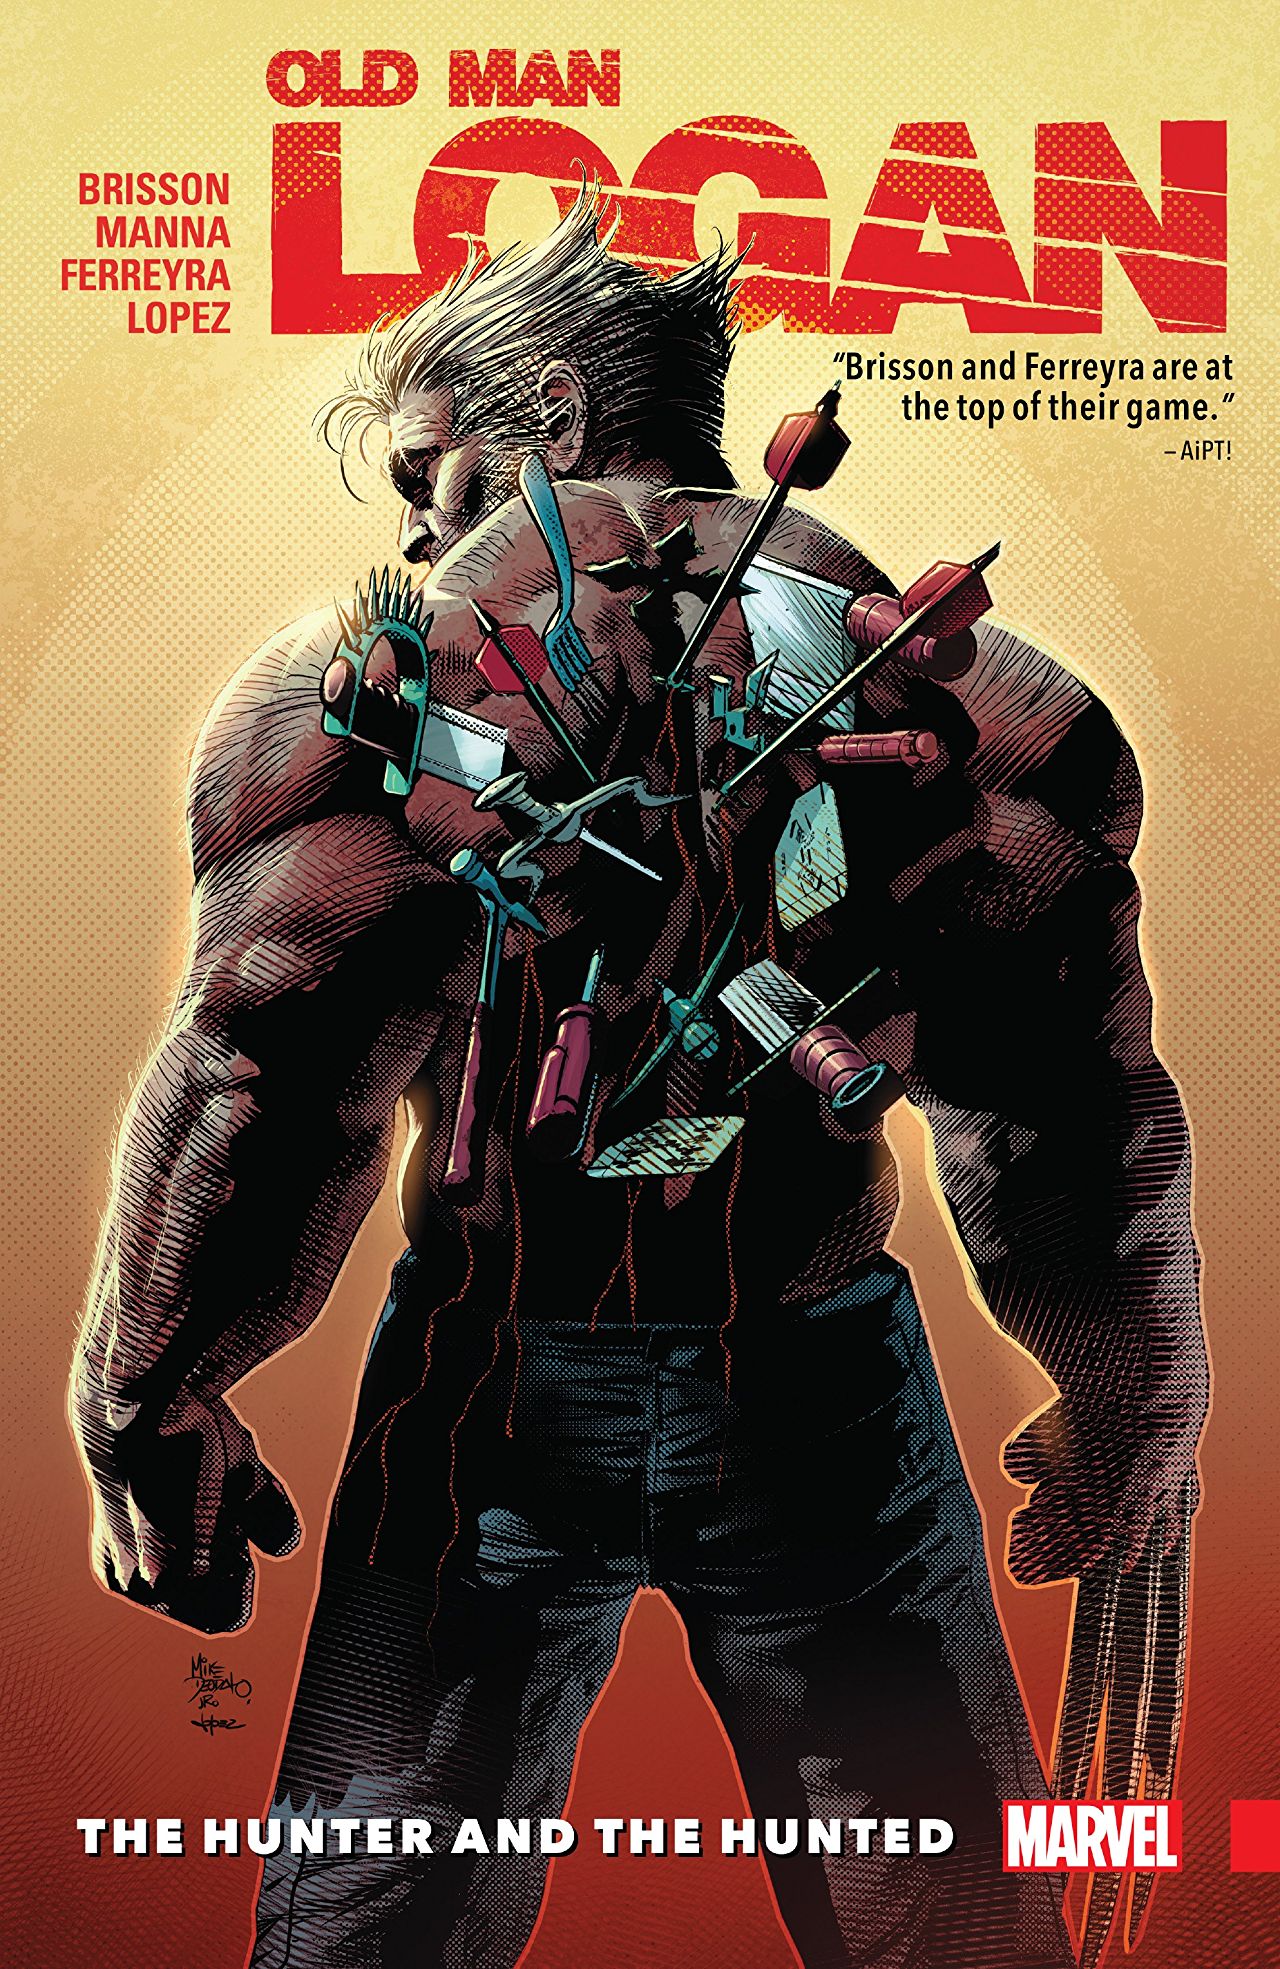 Old Man Logan Vol. 9: The Hunter and the Hunted review